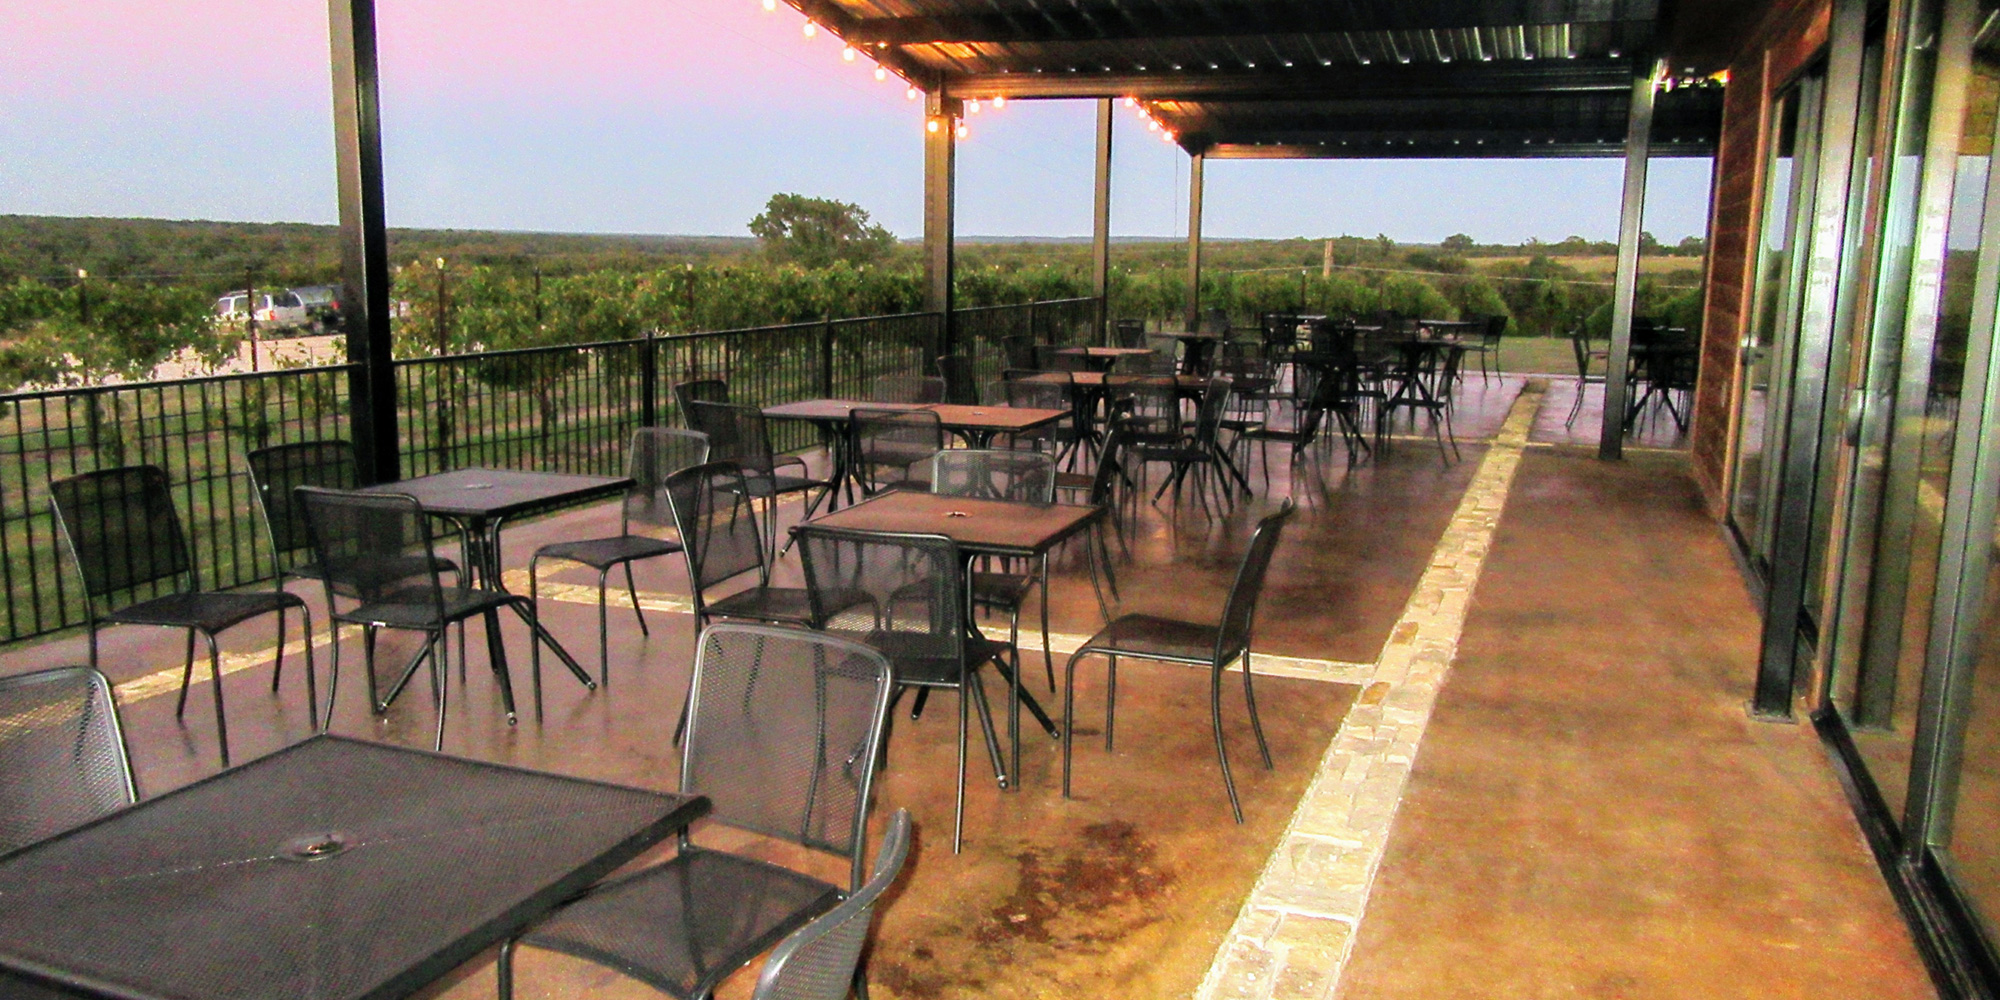 View from Outdoor Seating Area over Vineyards